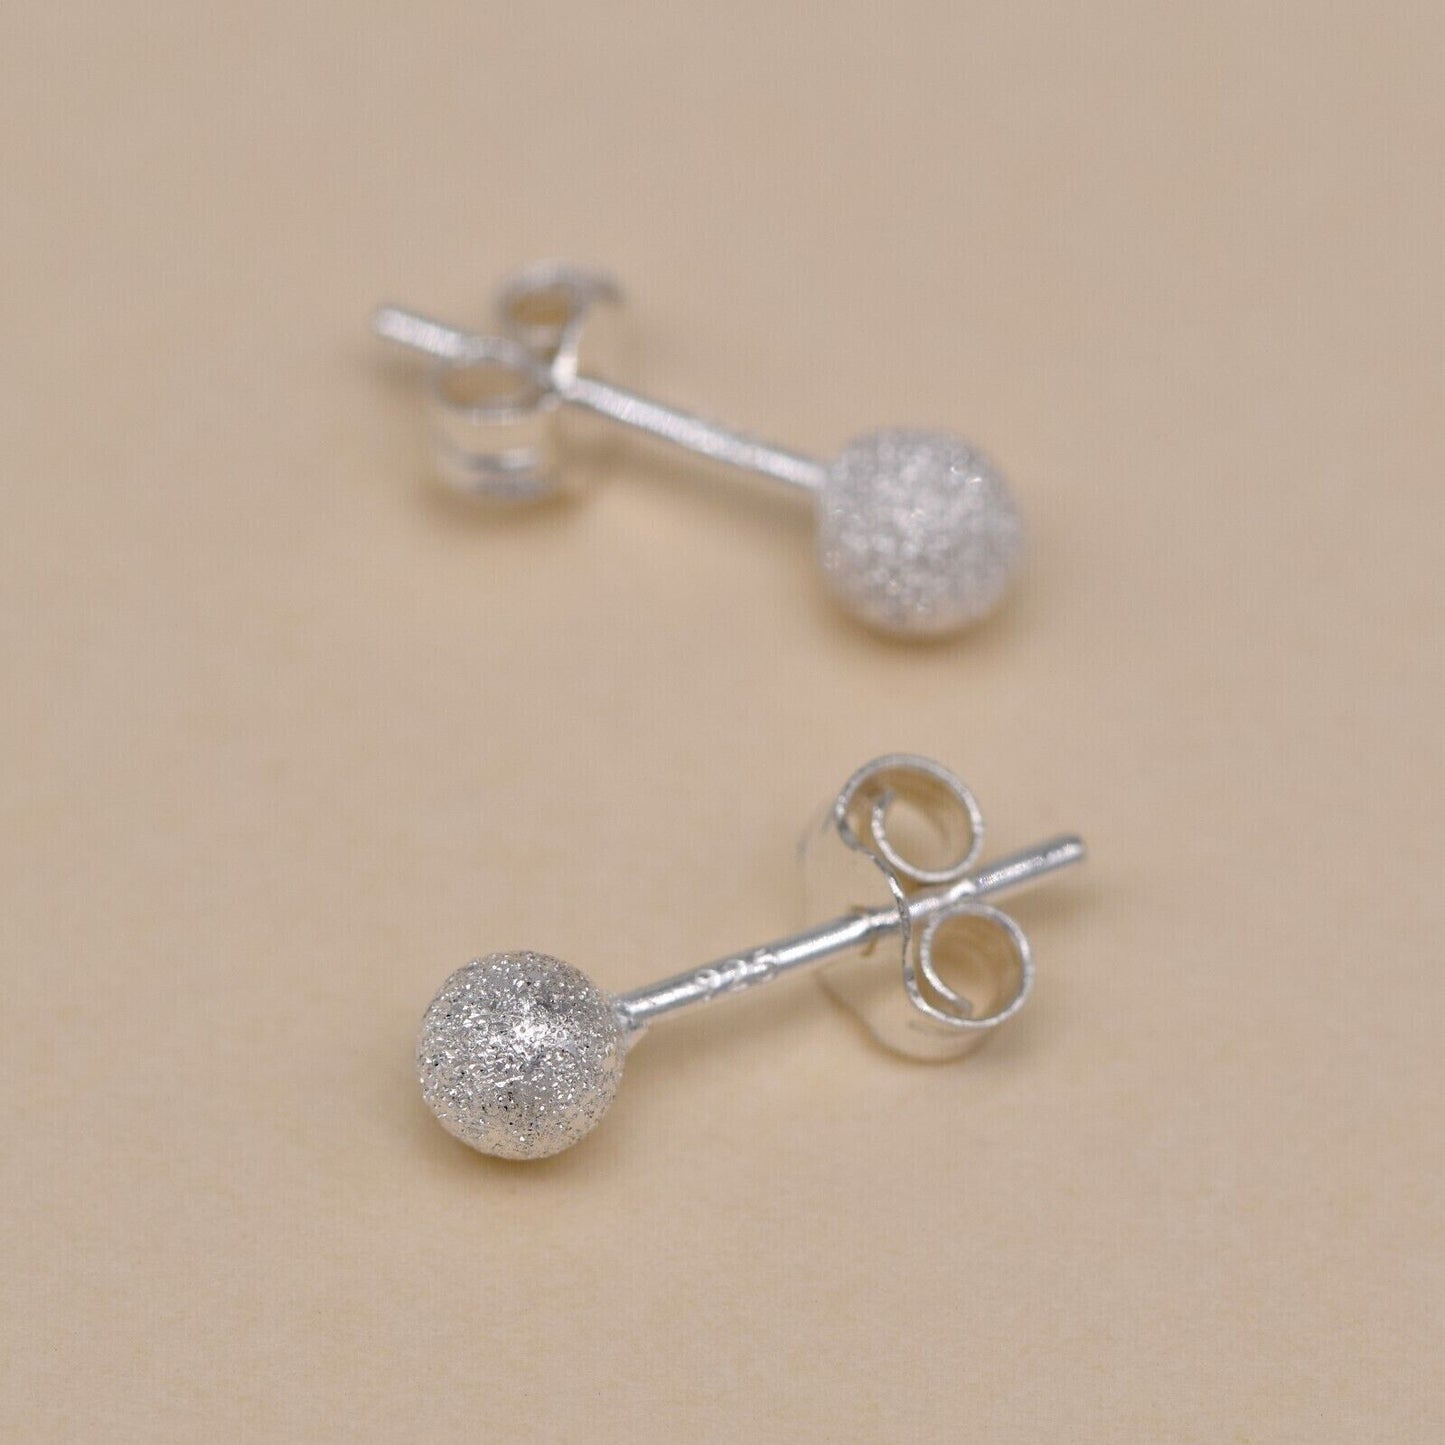 Genuine 925 Sterling Silver 4mm Frosted Ball Studs/Earrings